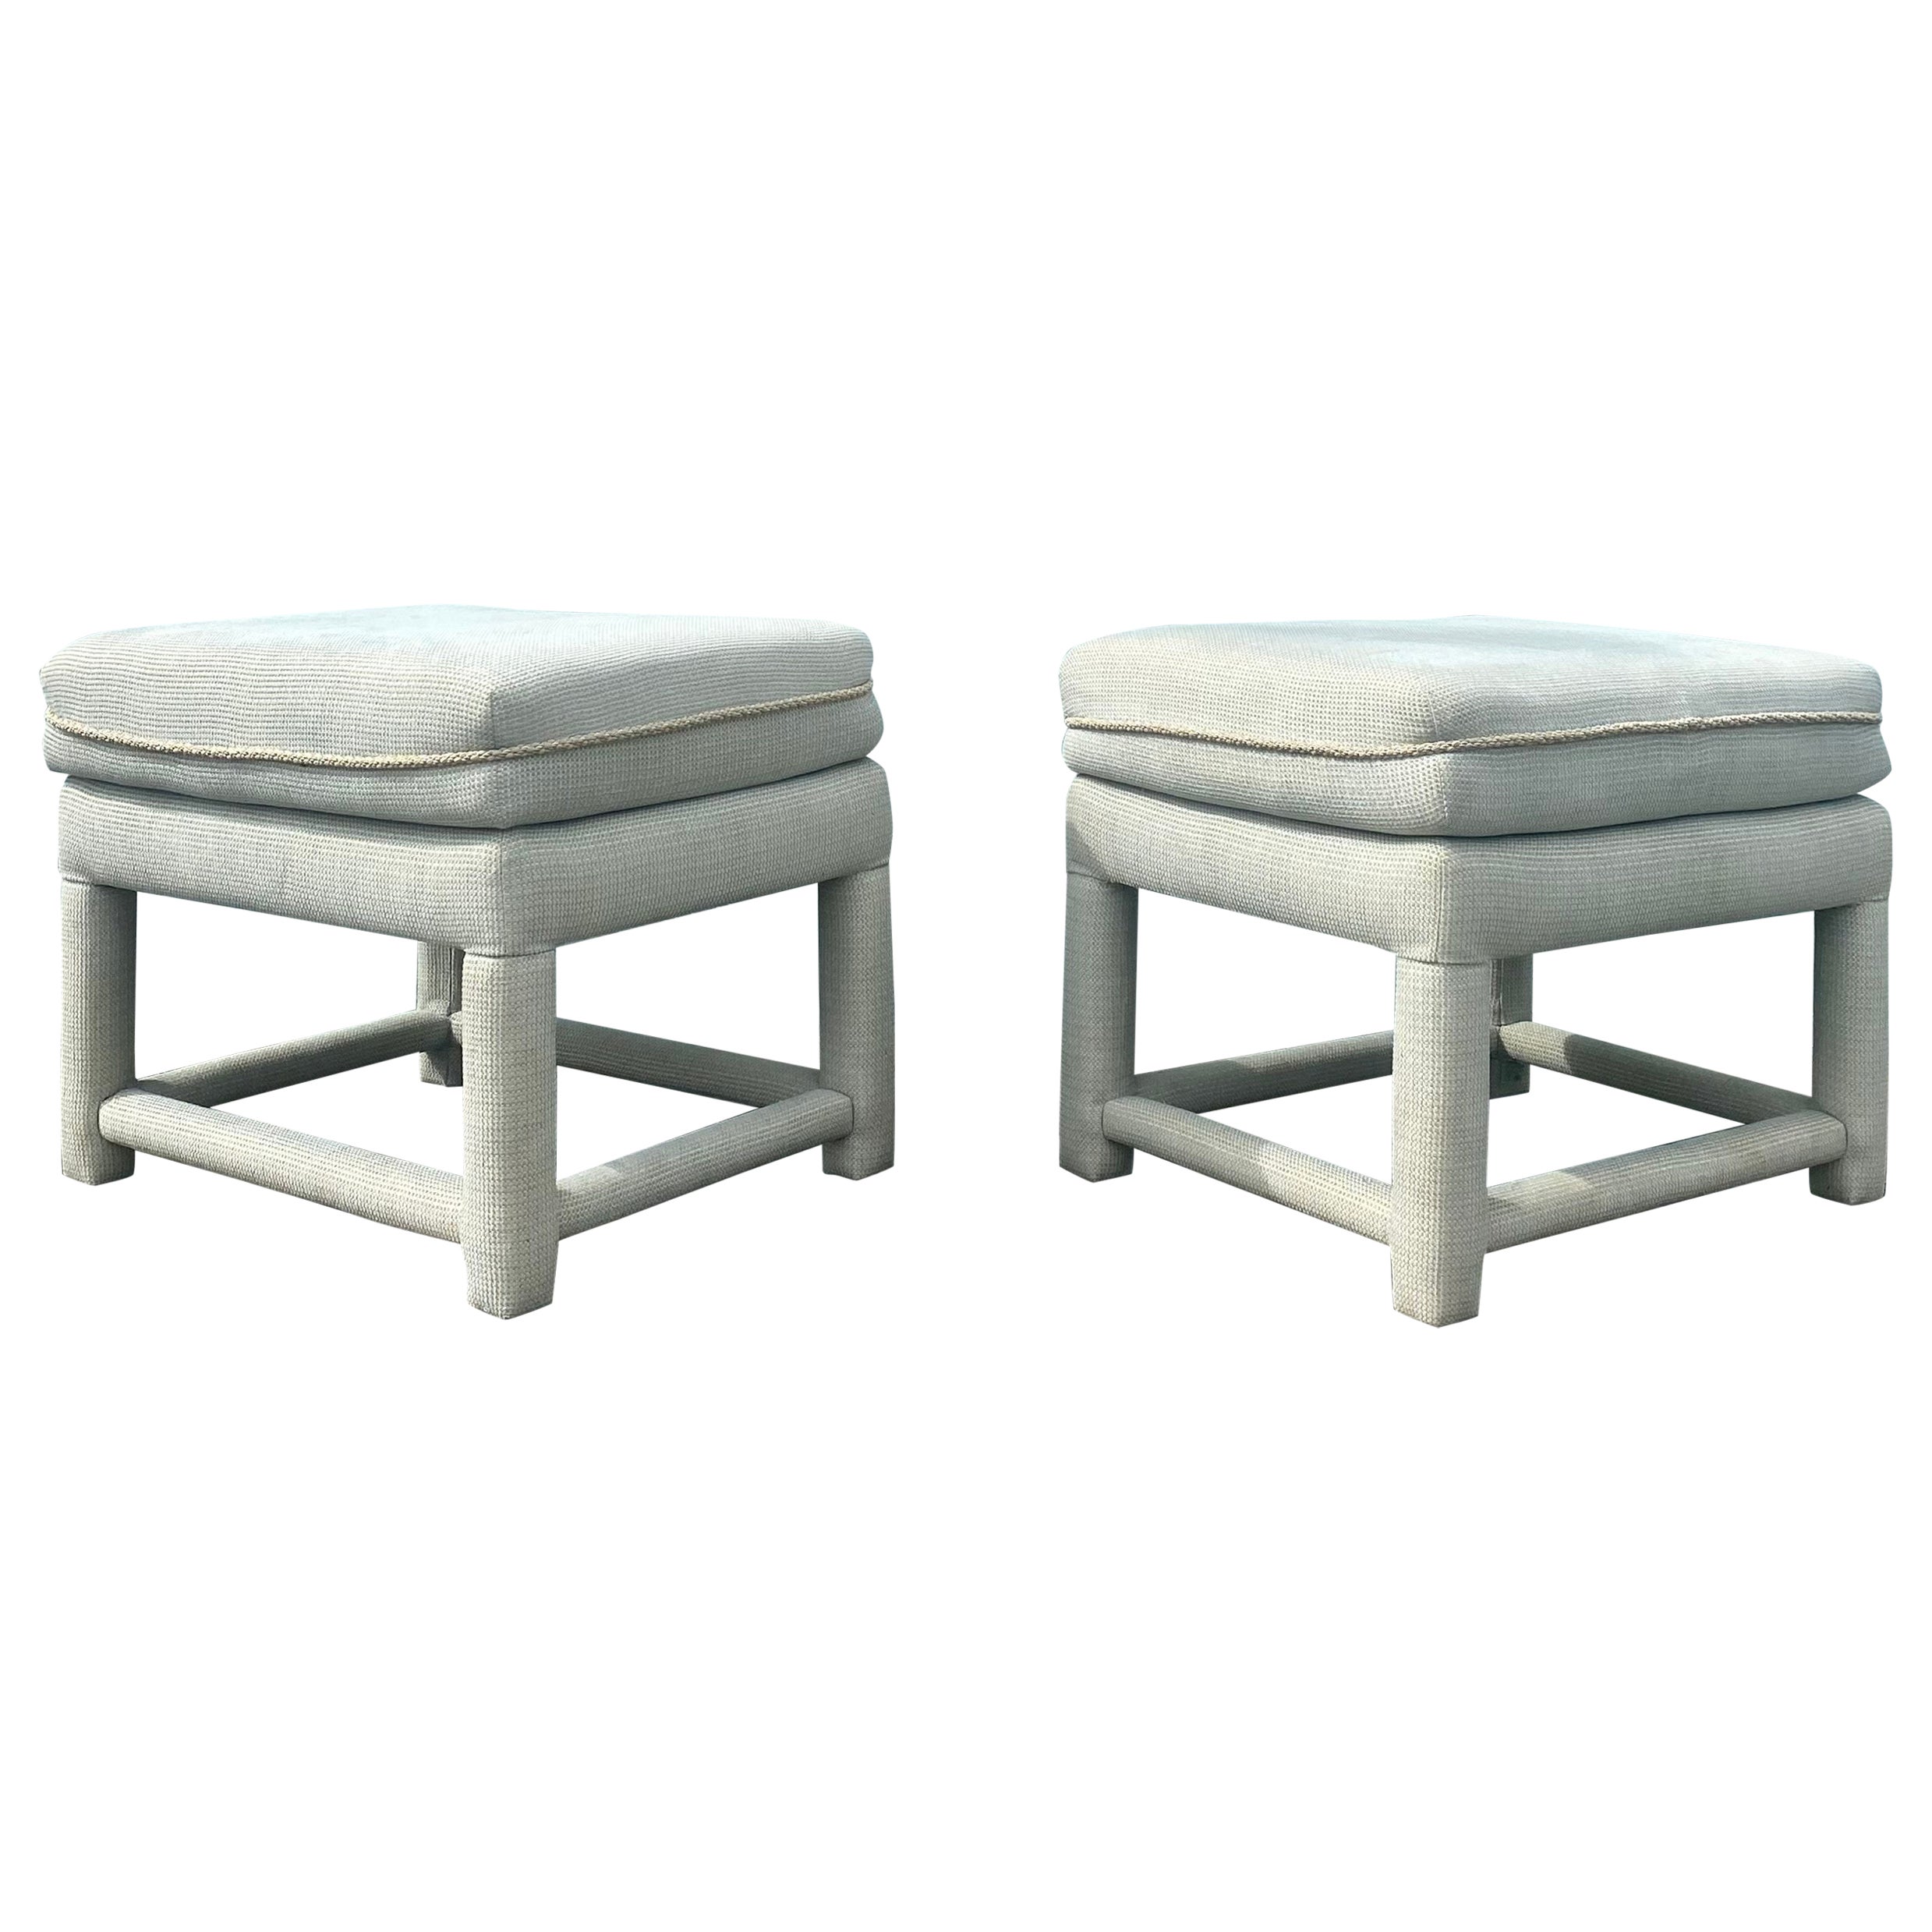 1970 Attributed to Milo Baughman Mini Parsons Benches Stools, Set of 2 For Sale